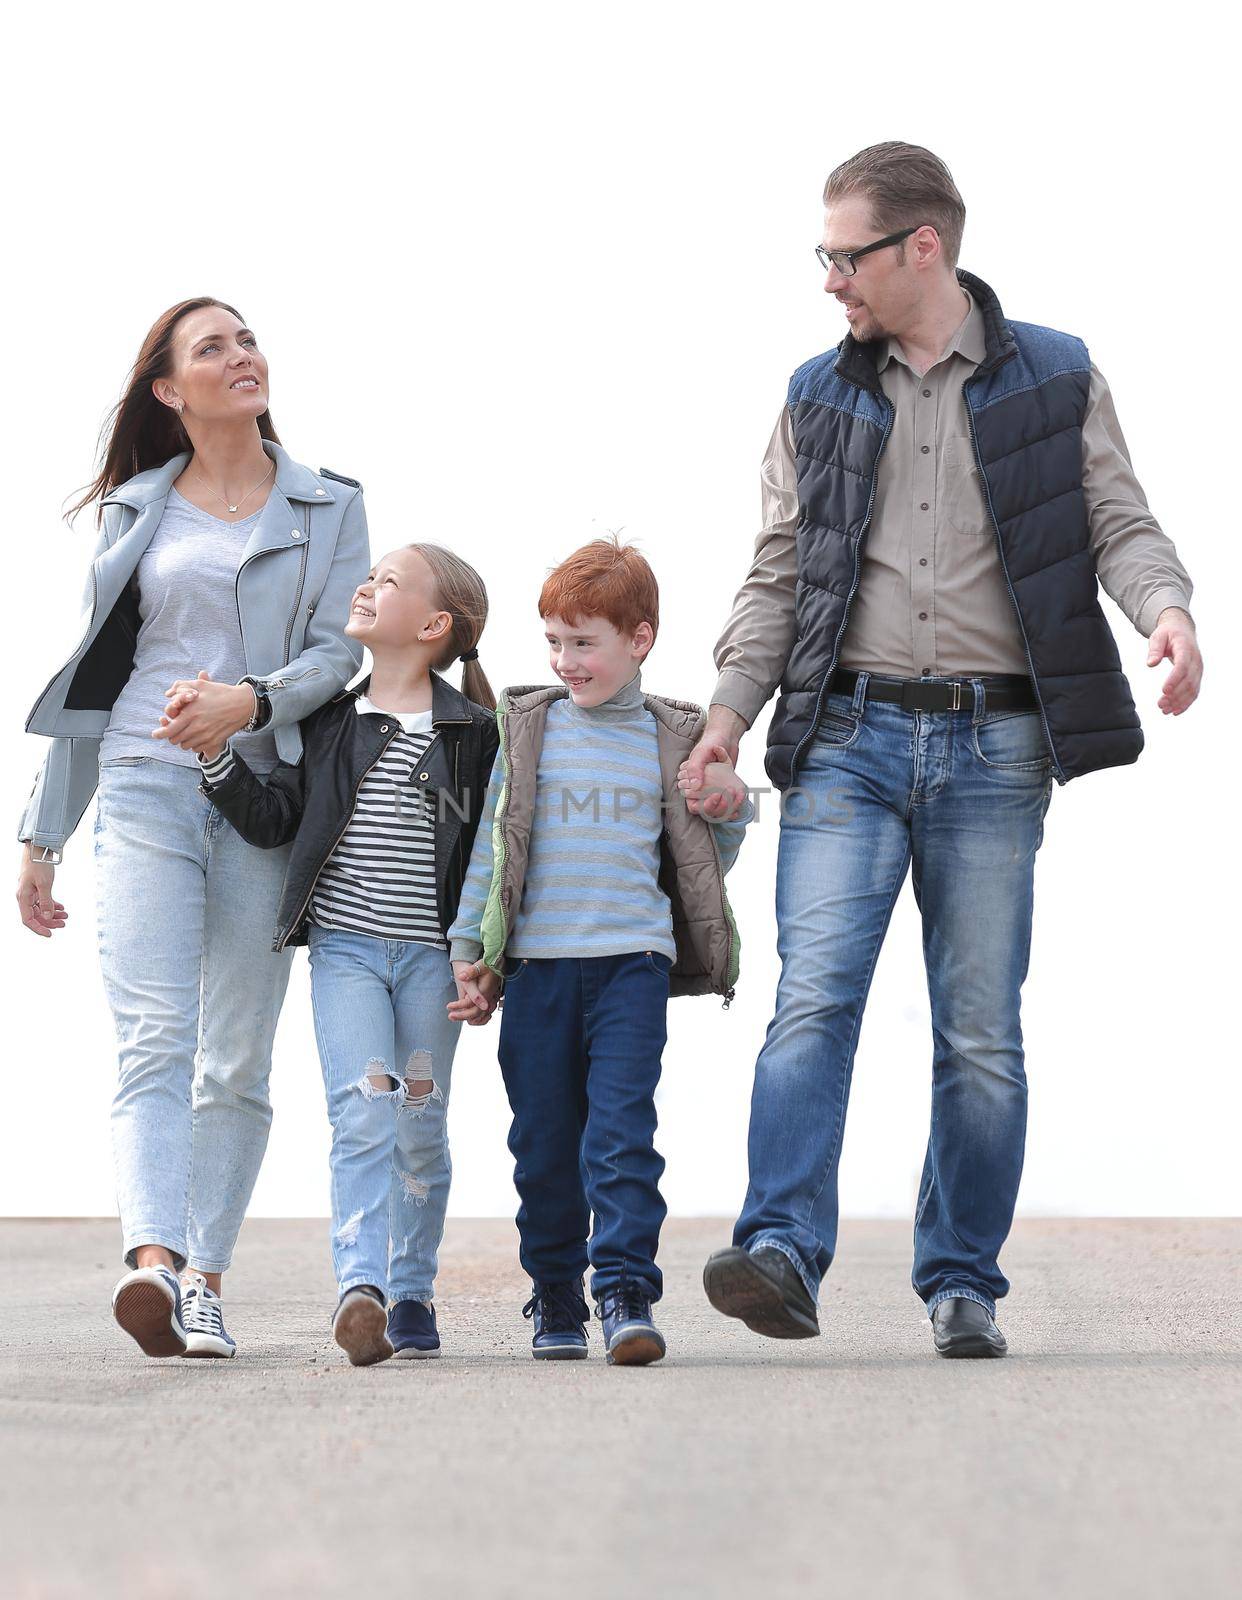 parents with their children walking along together.photo with copy space